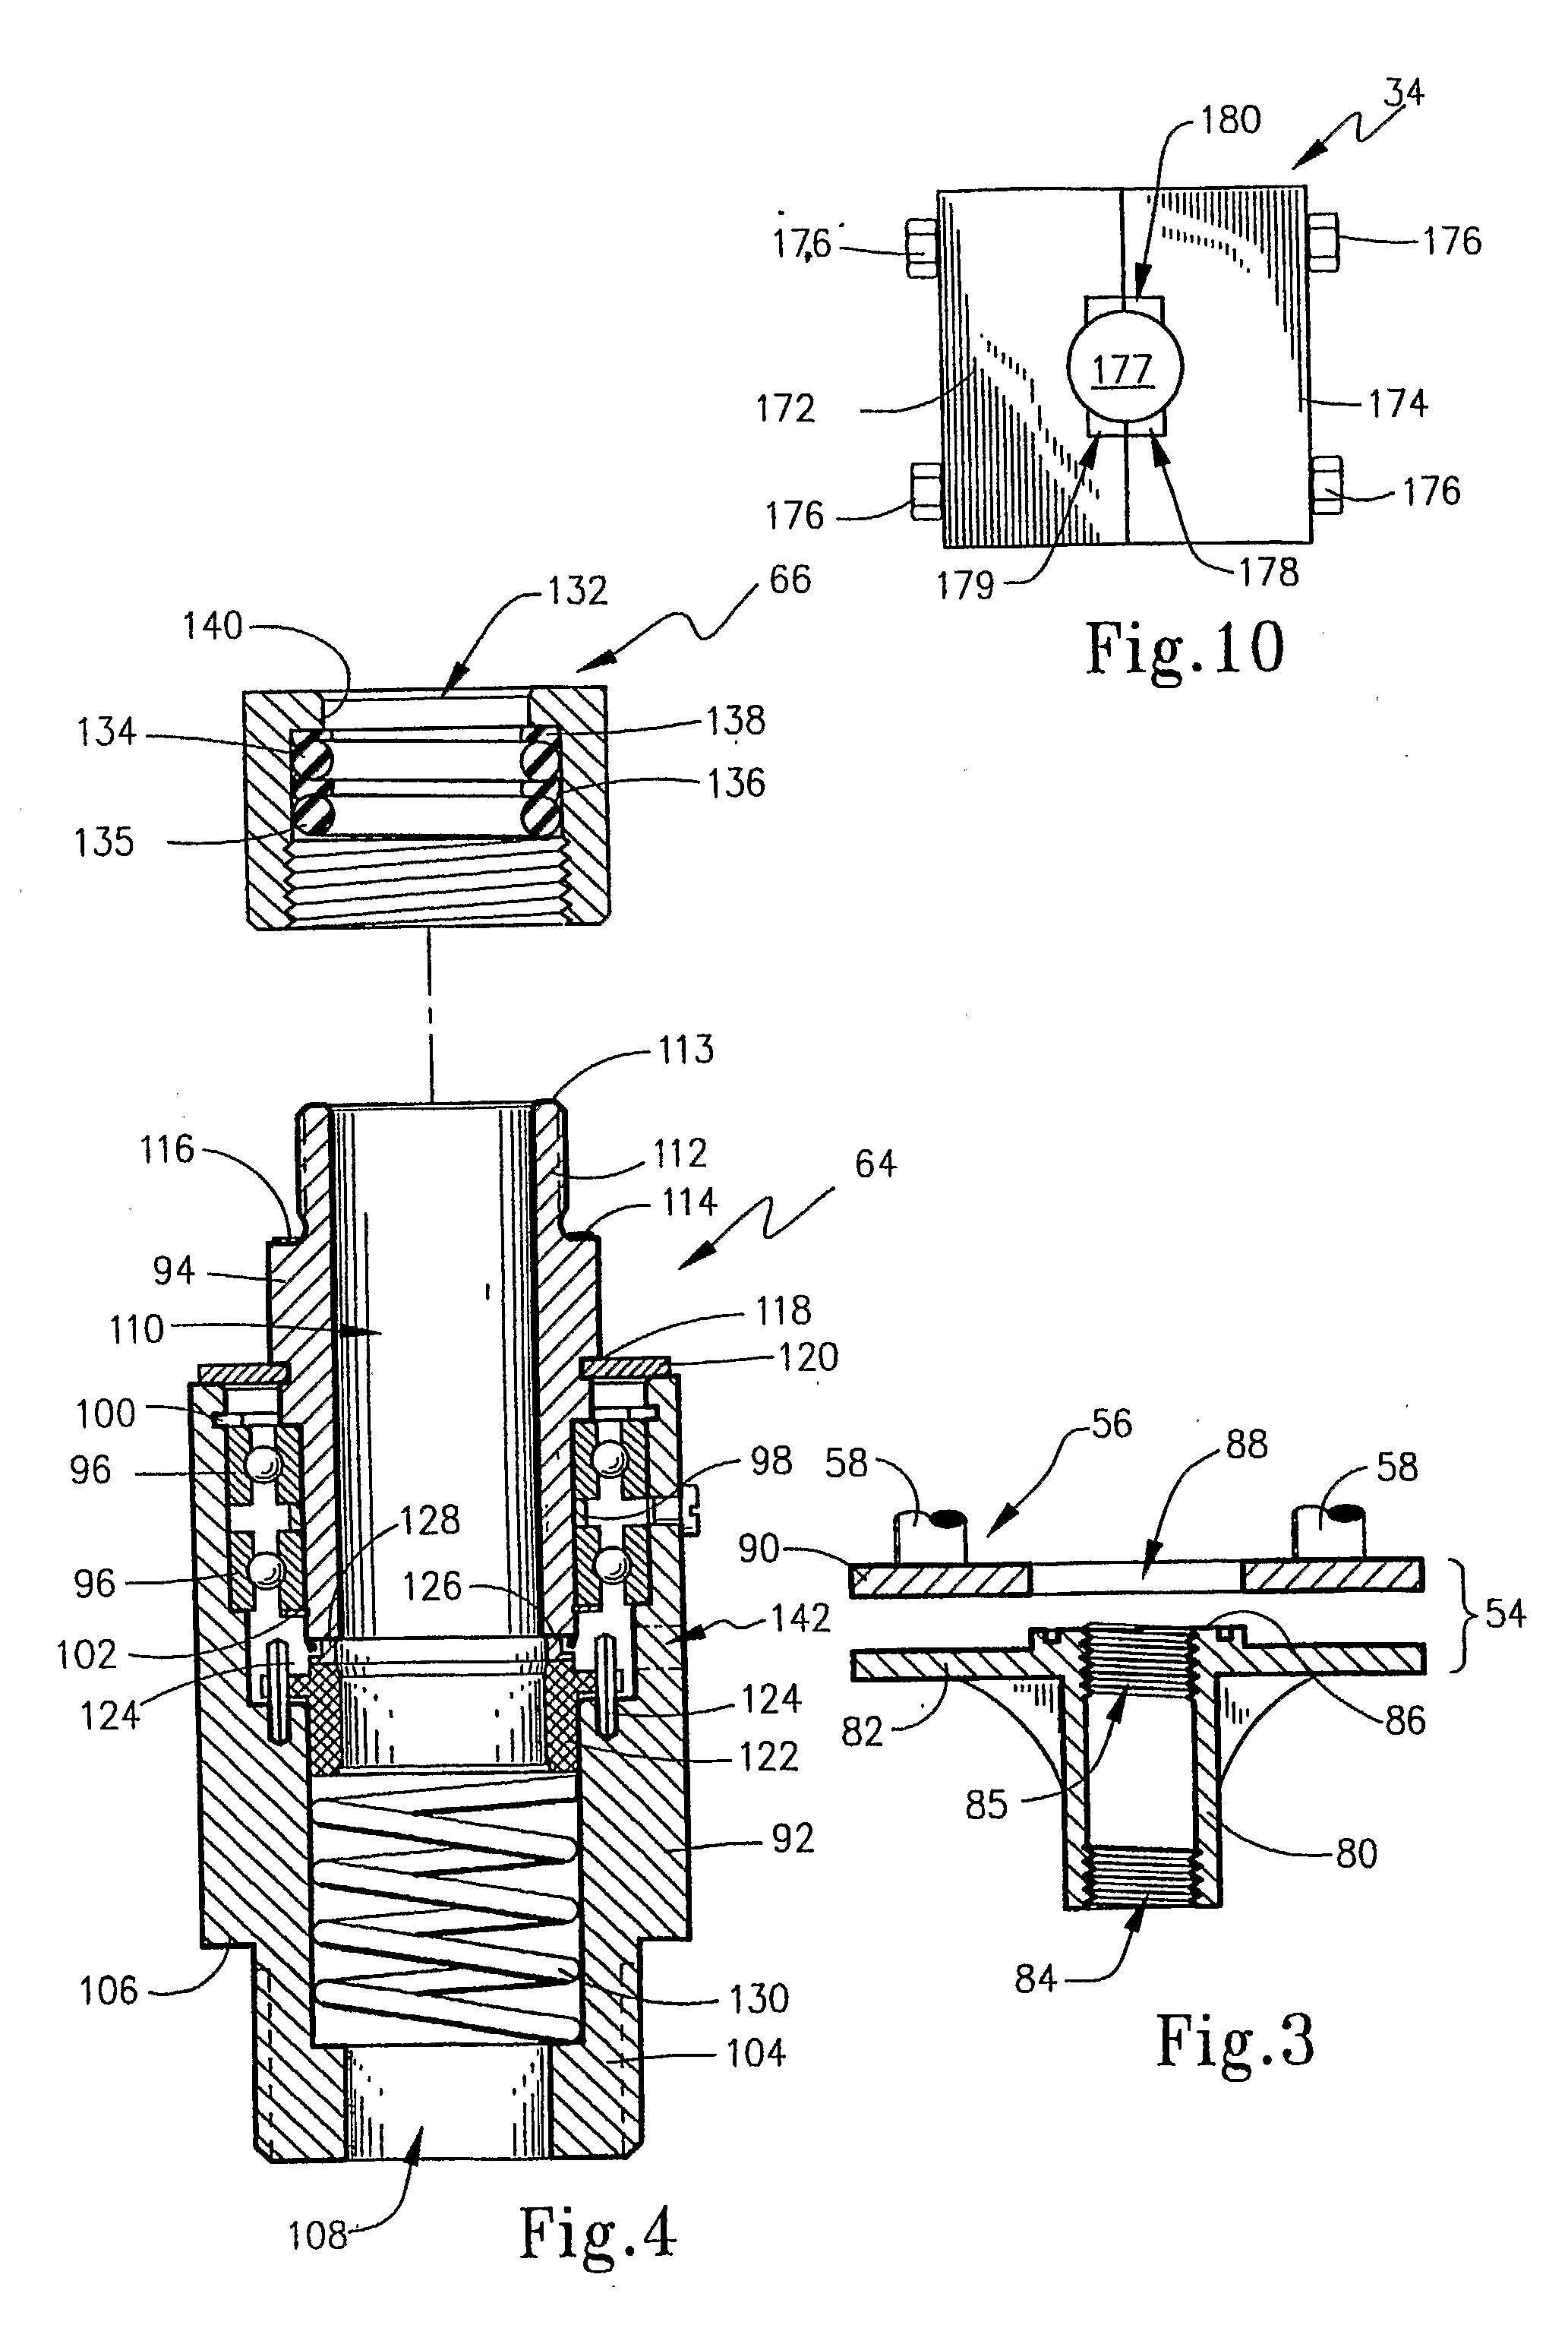 Linear Drive Assembly with Rotary Union for Well Head Applications and Method Implemented Thereby